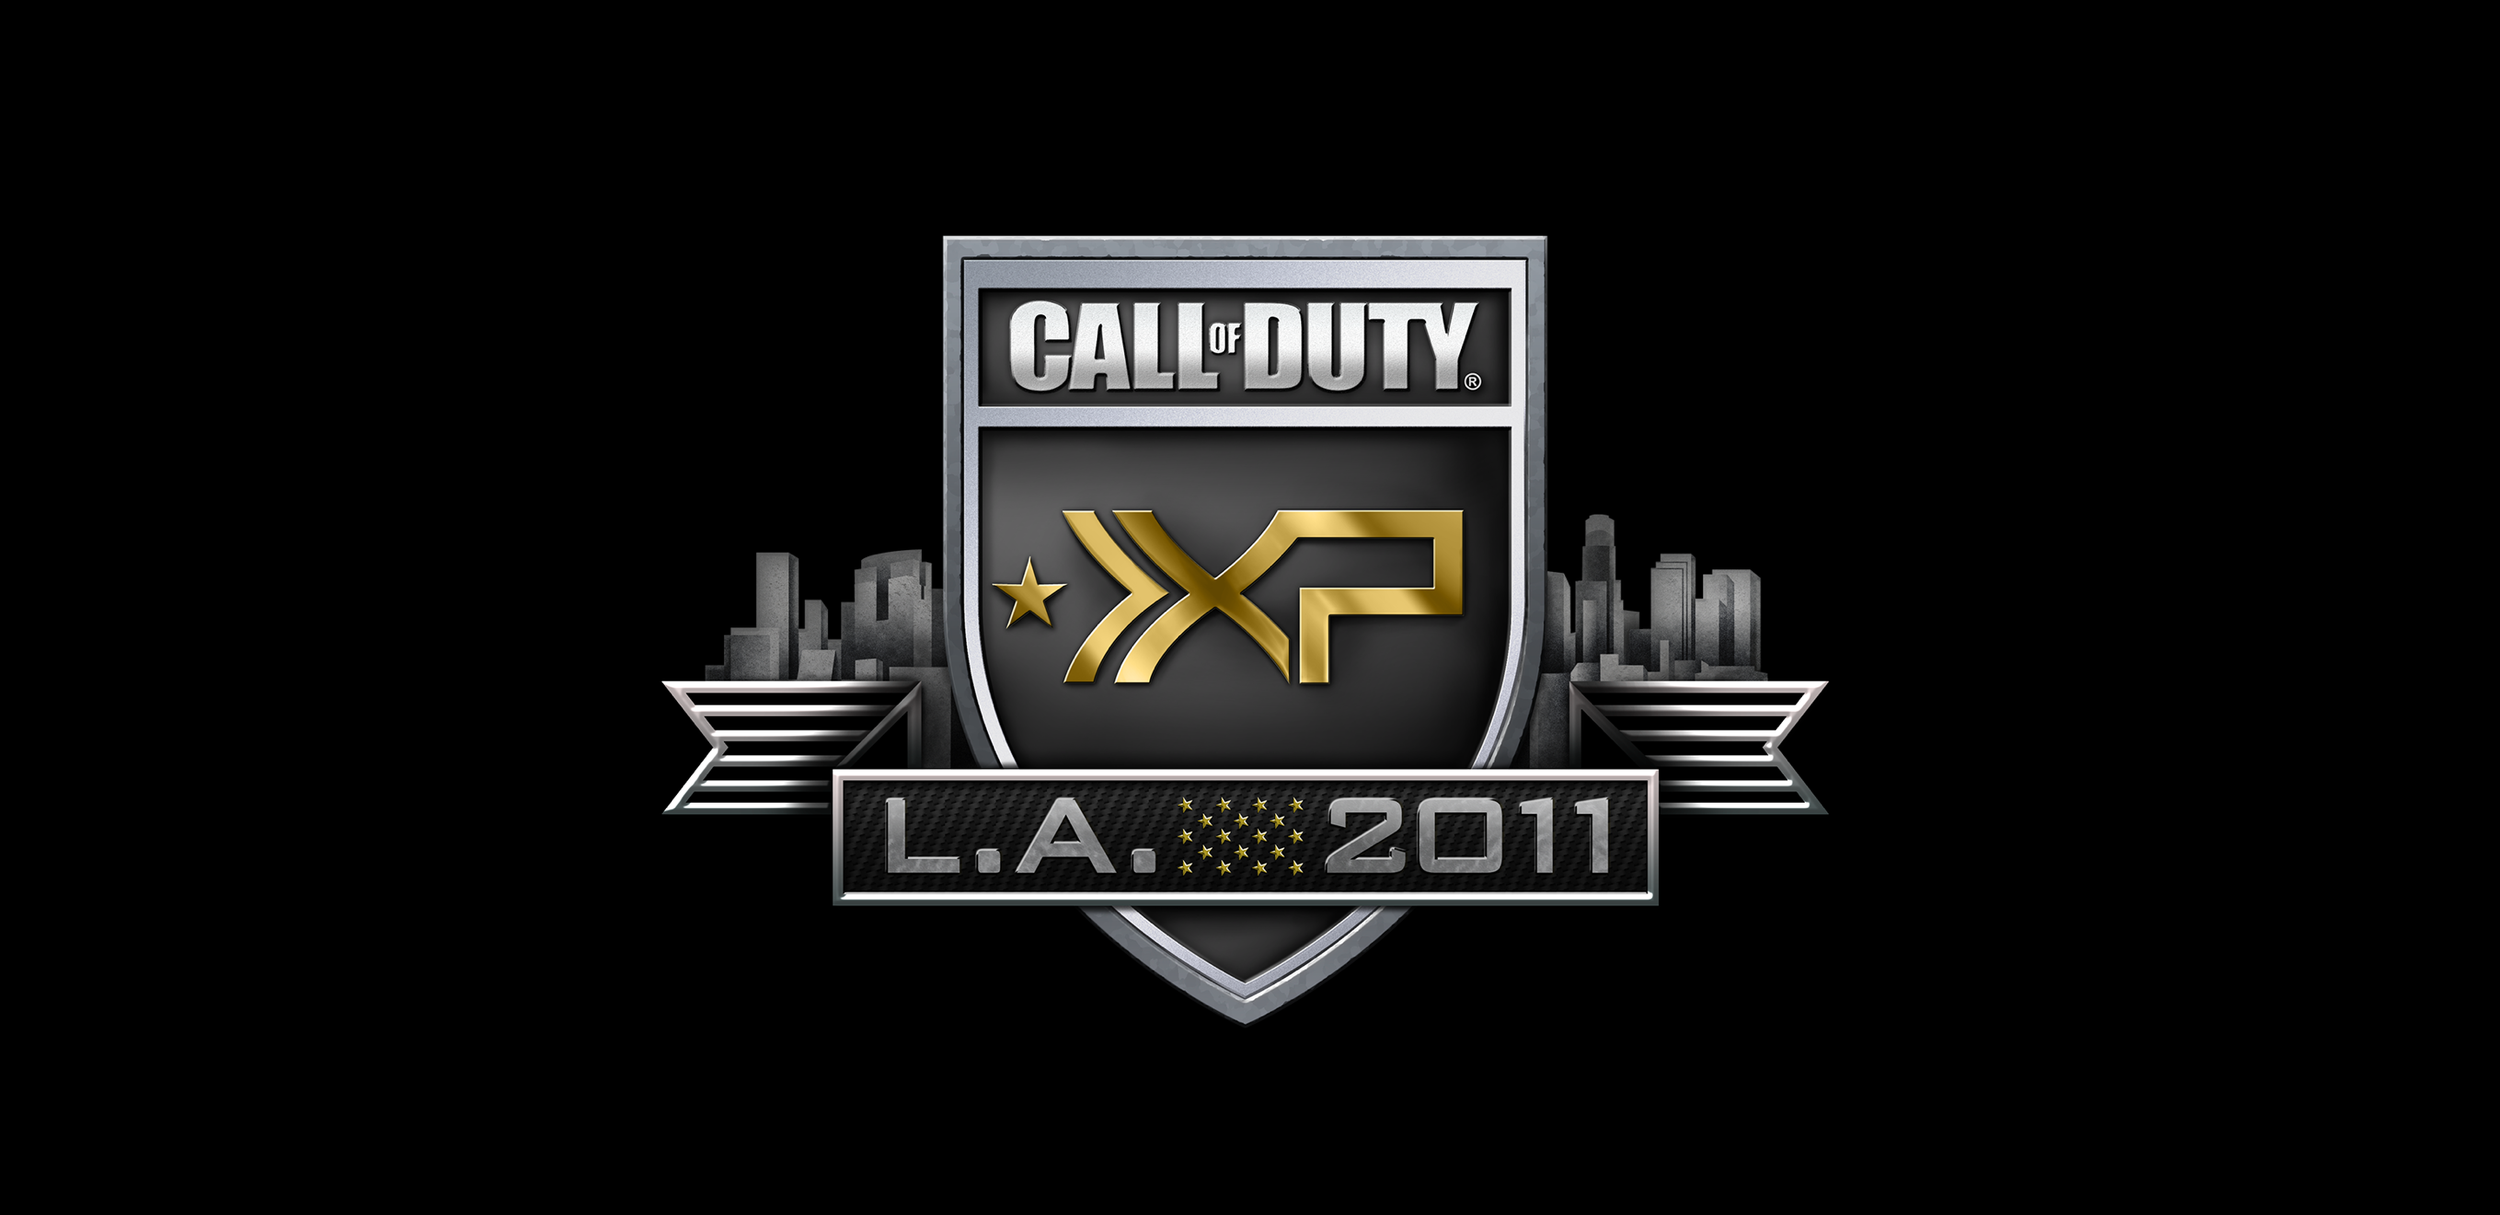 XP, Call of Duty Wiki